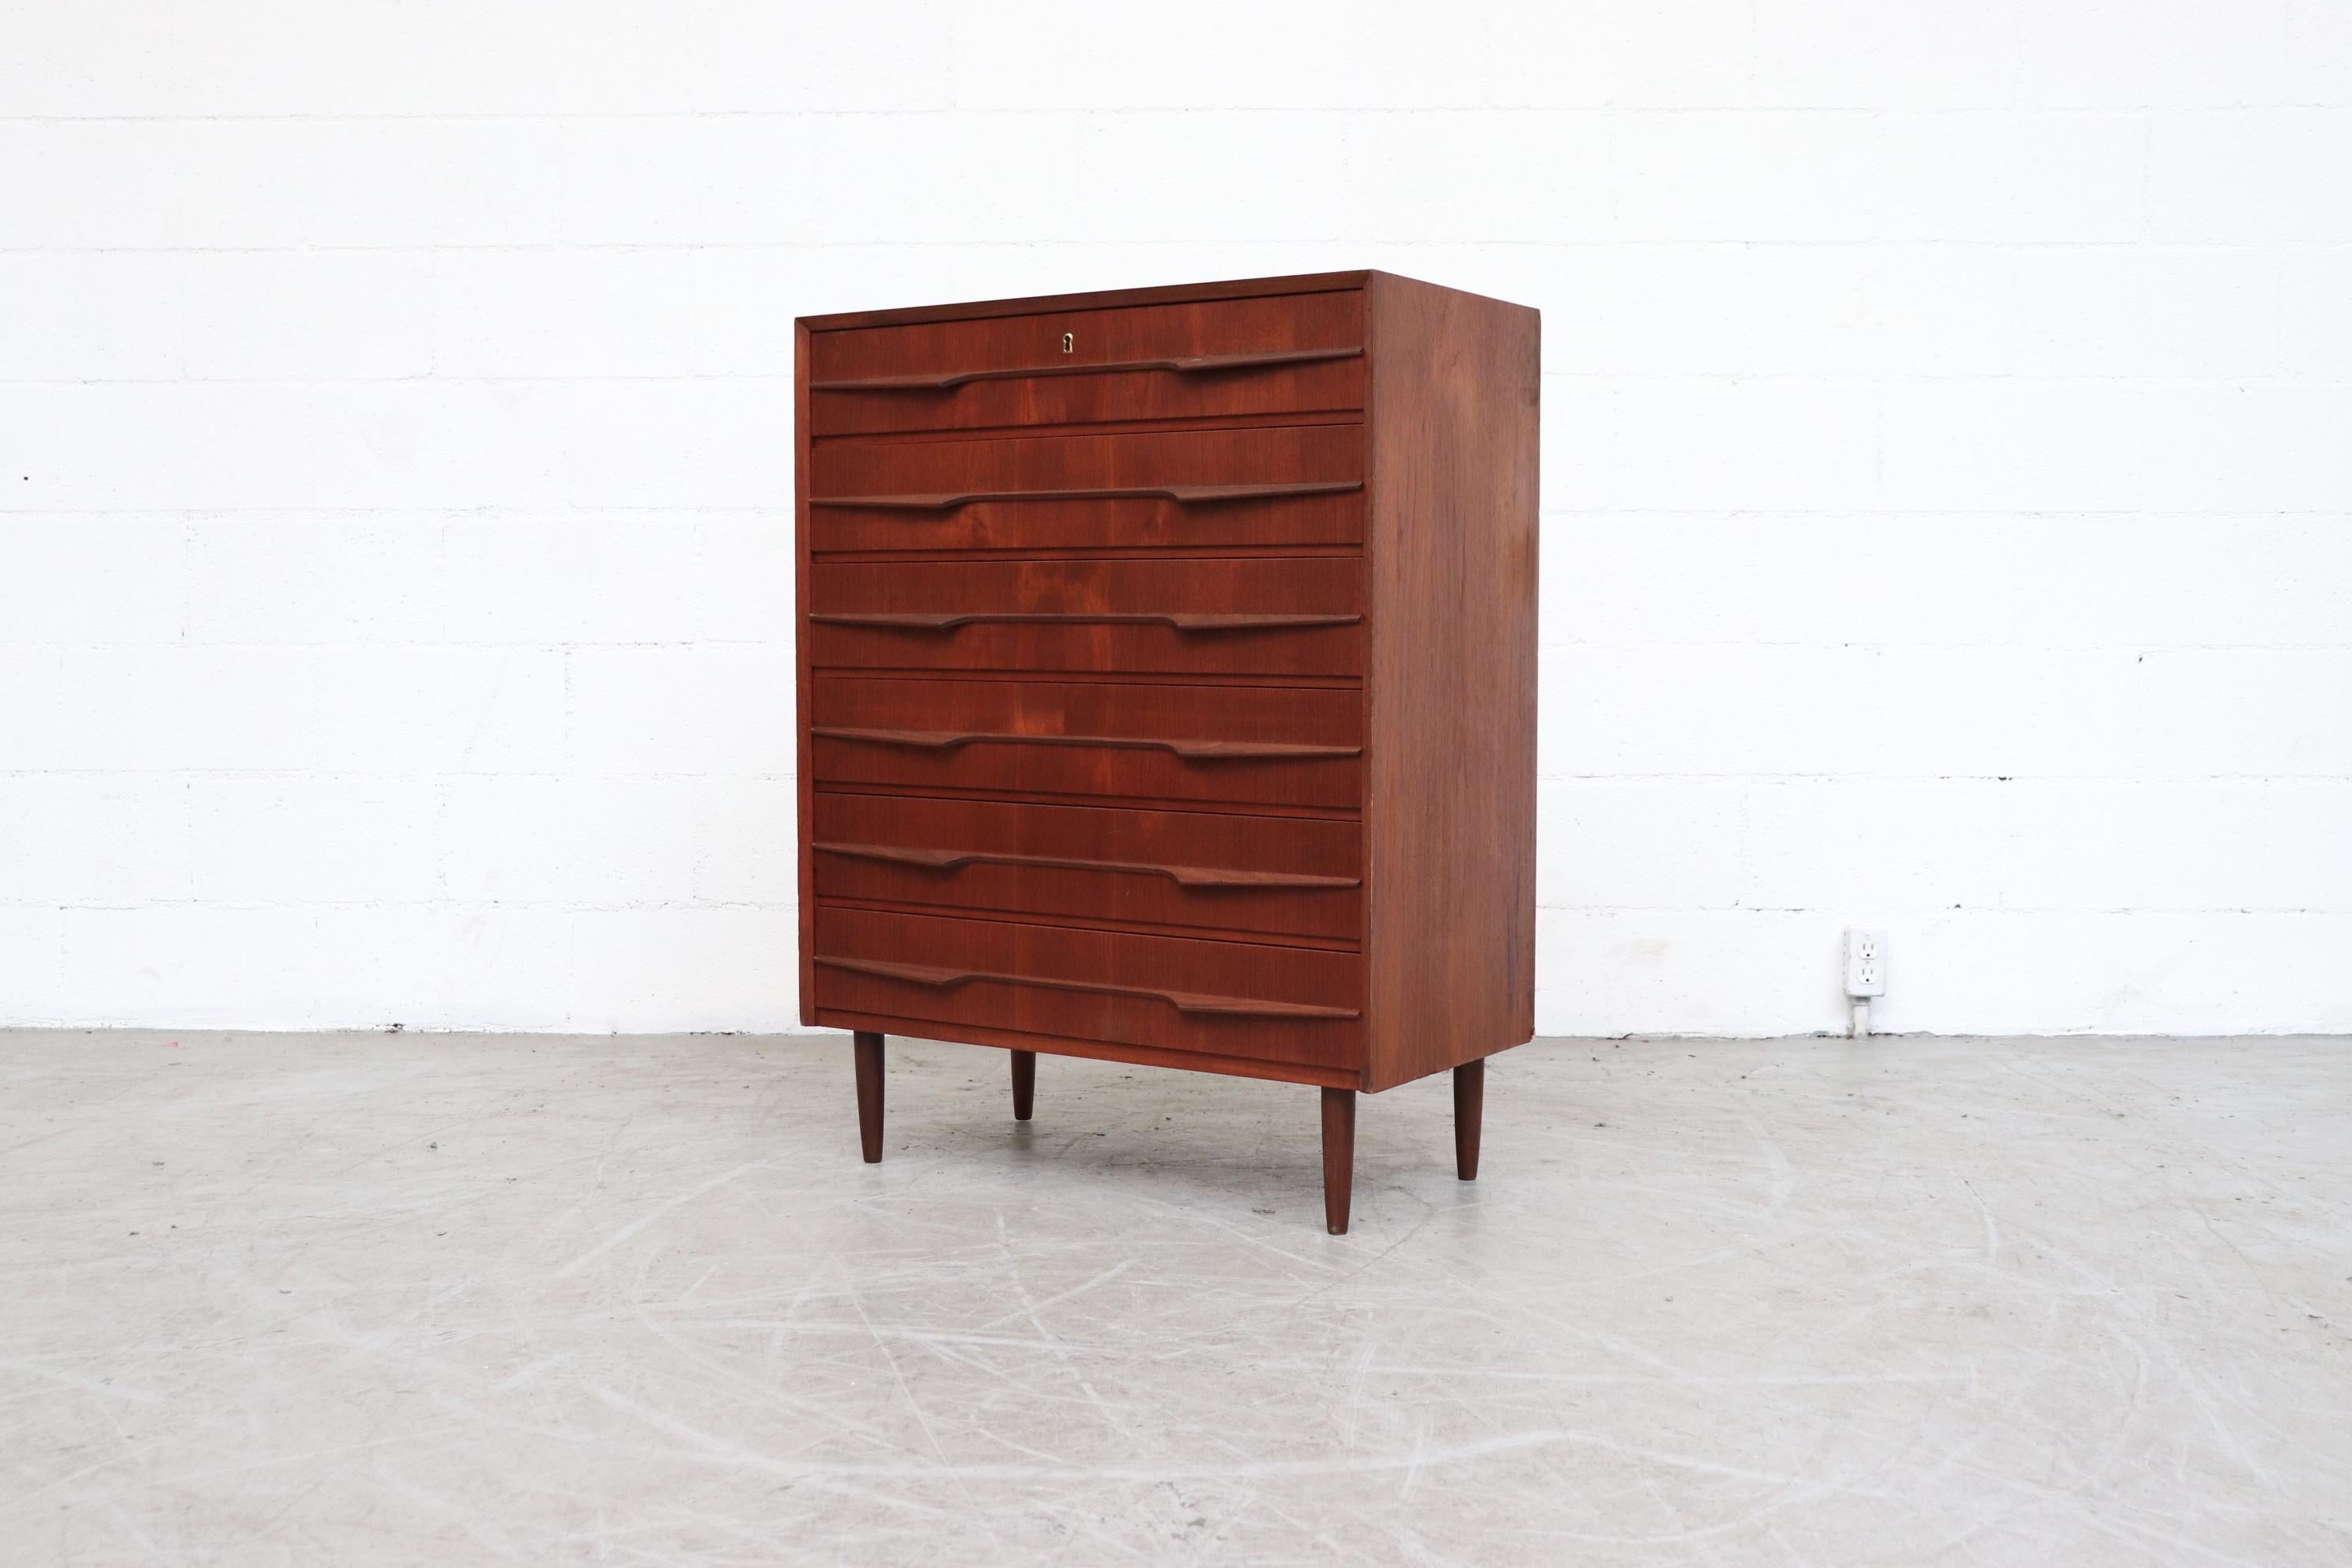 Tall Danish midcentury teak dresser. 6 drawers with organically wing-like carved hand pulls and tapered legs. Fluid grain pattern throughout the drawers. Lightly refinished. In good original condition with some signs of wear consistent with age and